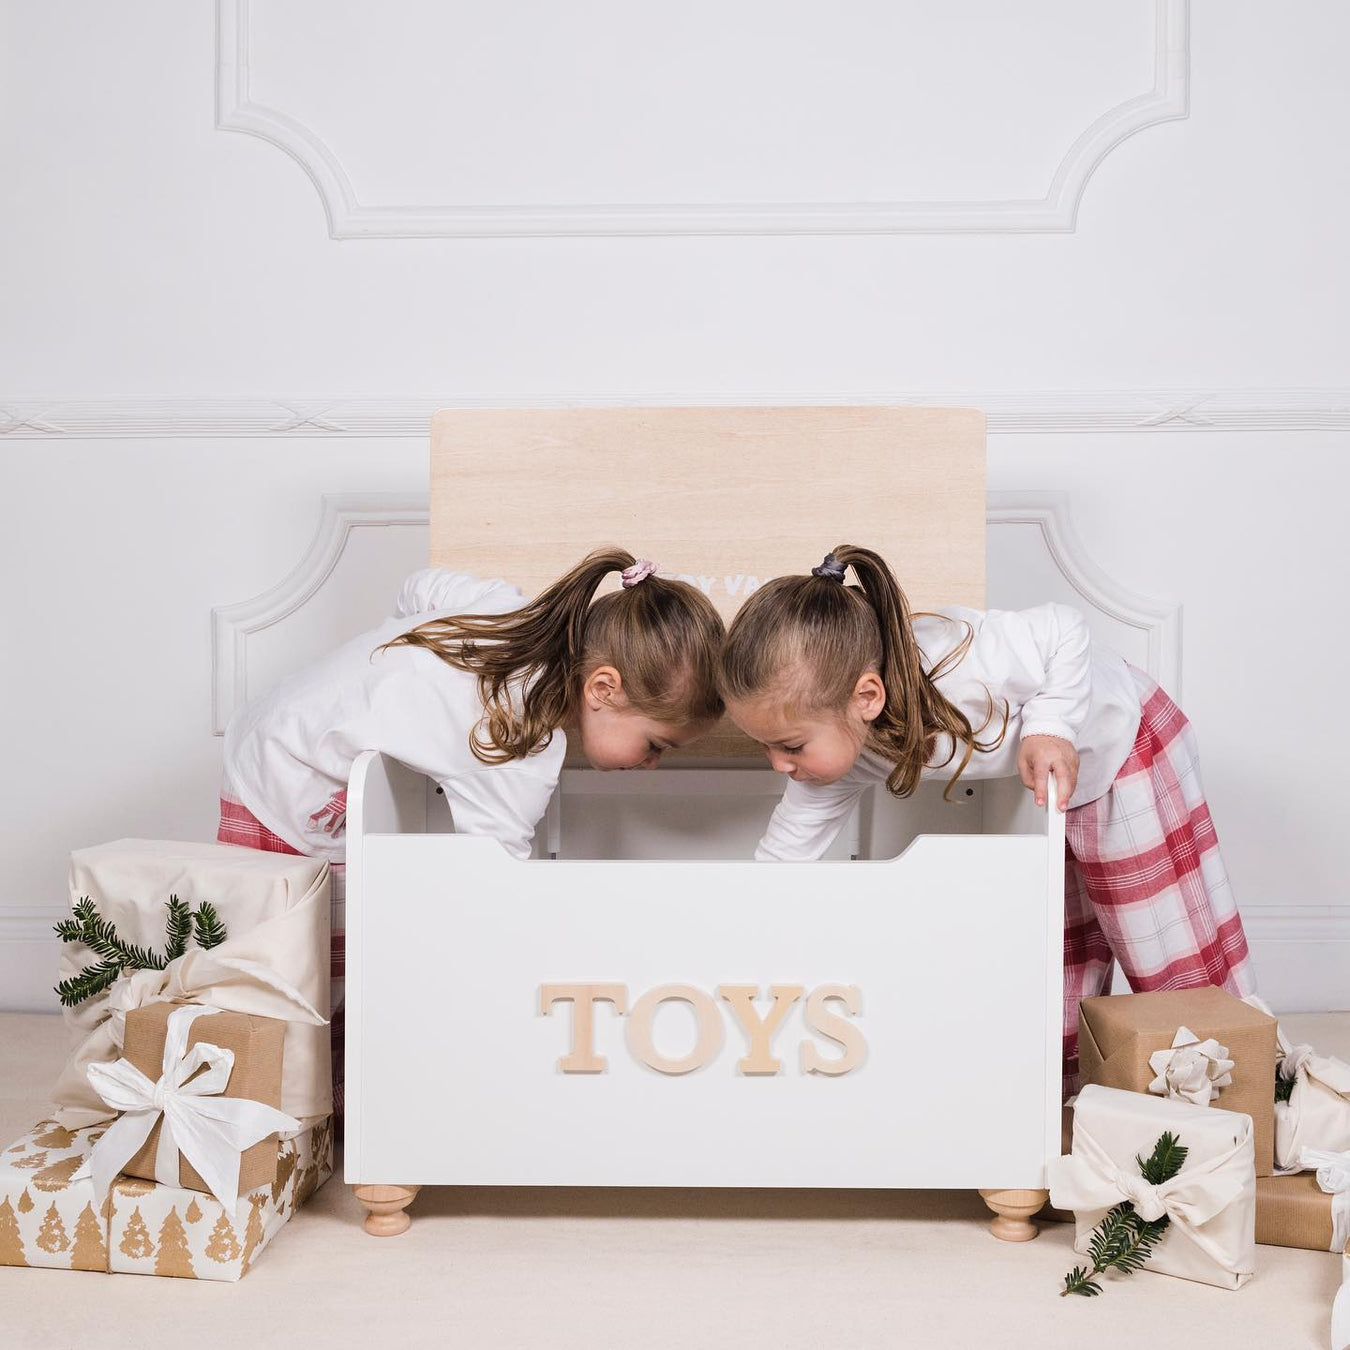 Top Christmas Gifts For Children